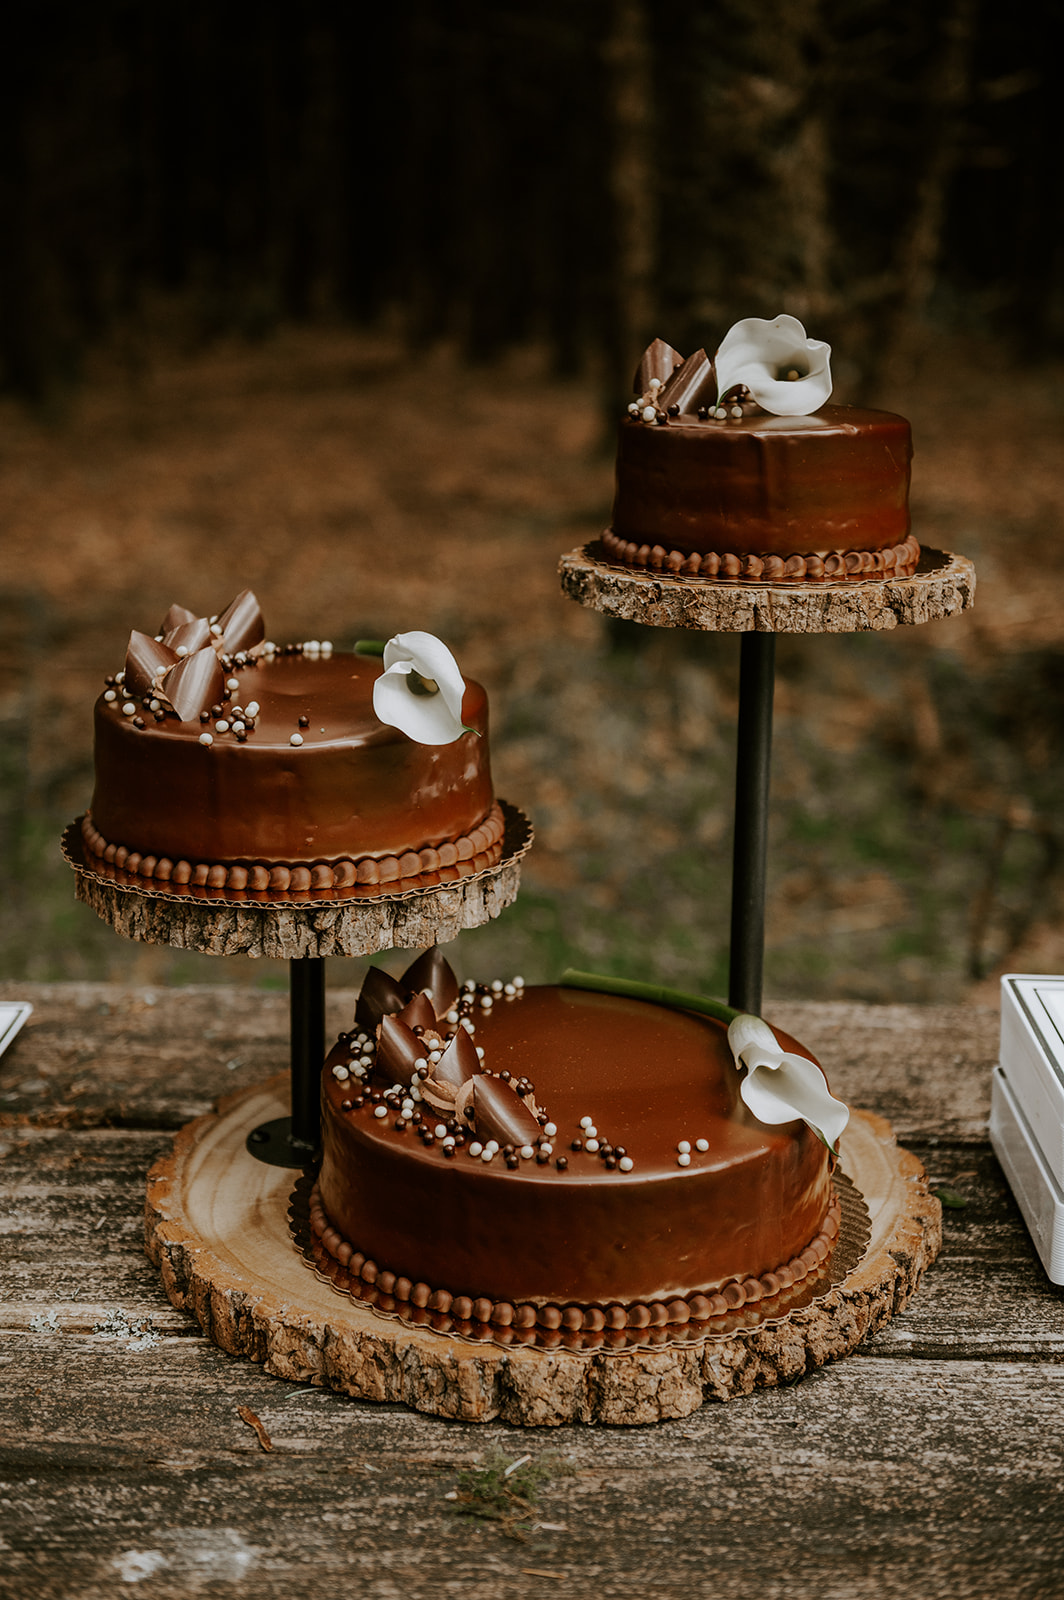 Chocolate cake on tiered wooden rounds for wedding desert 